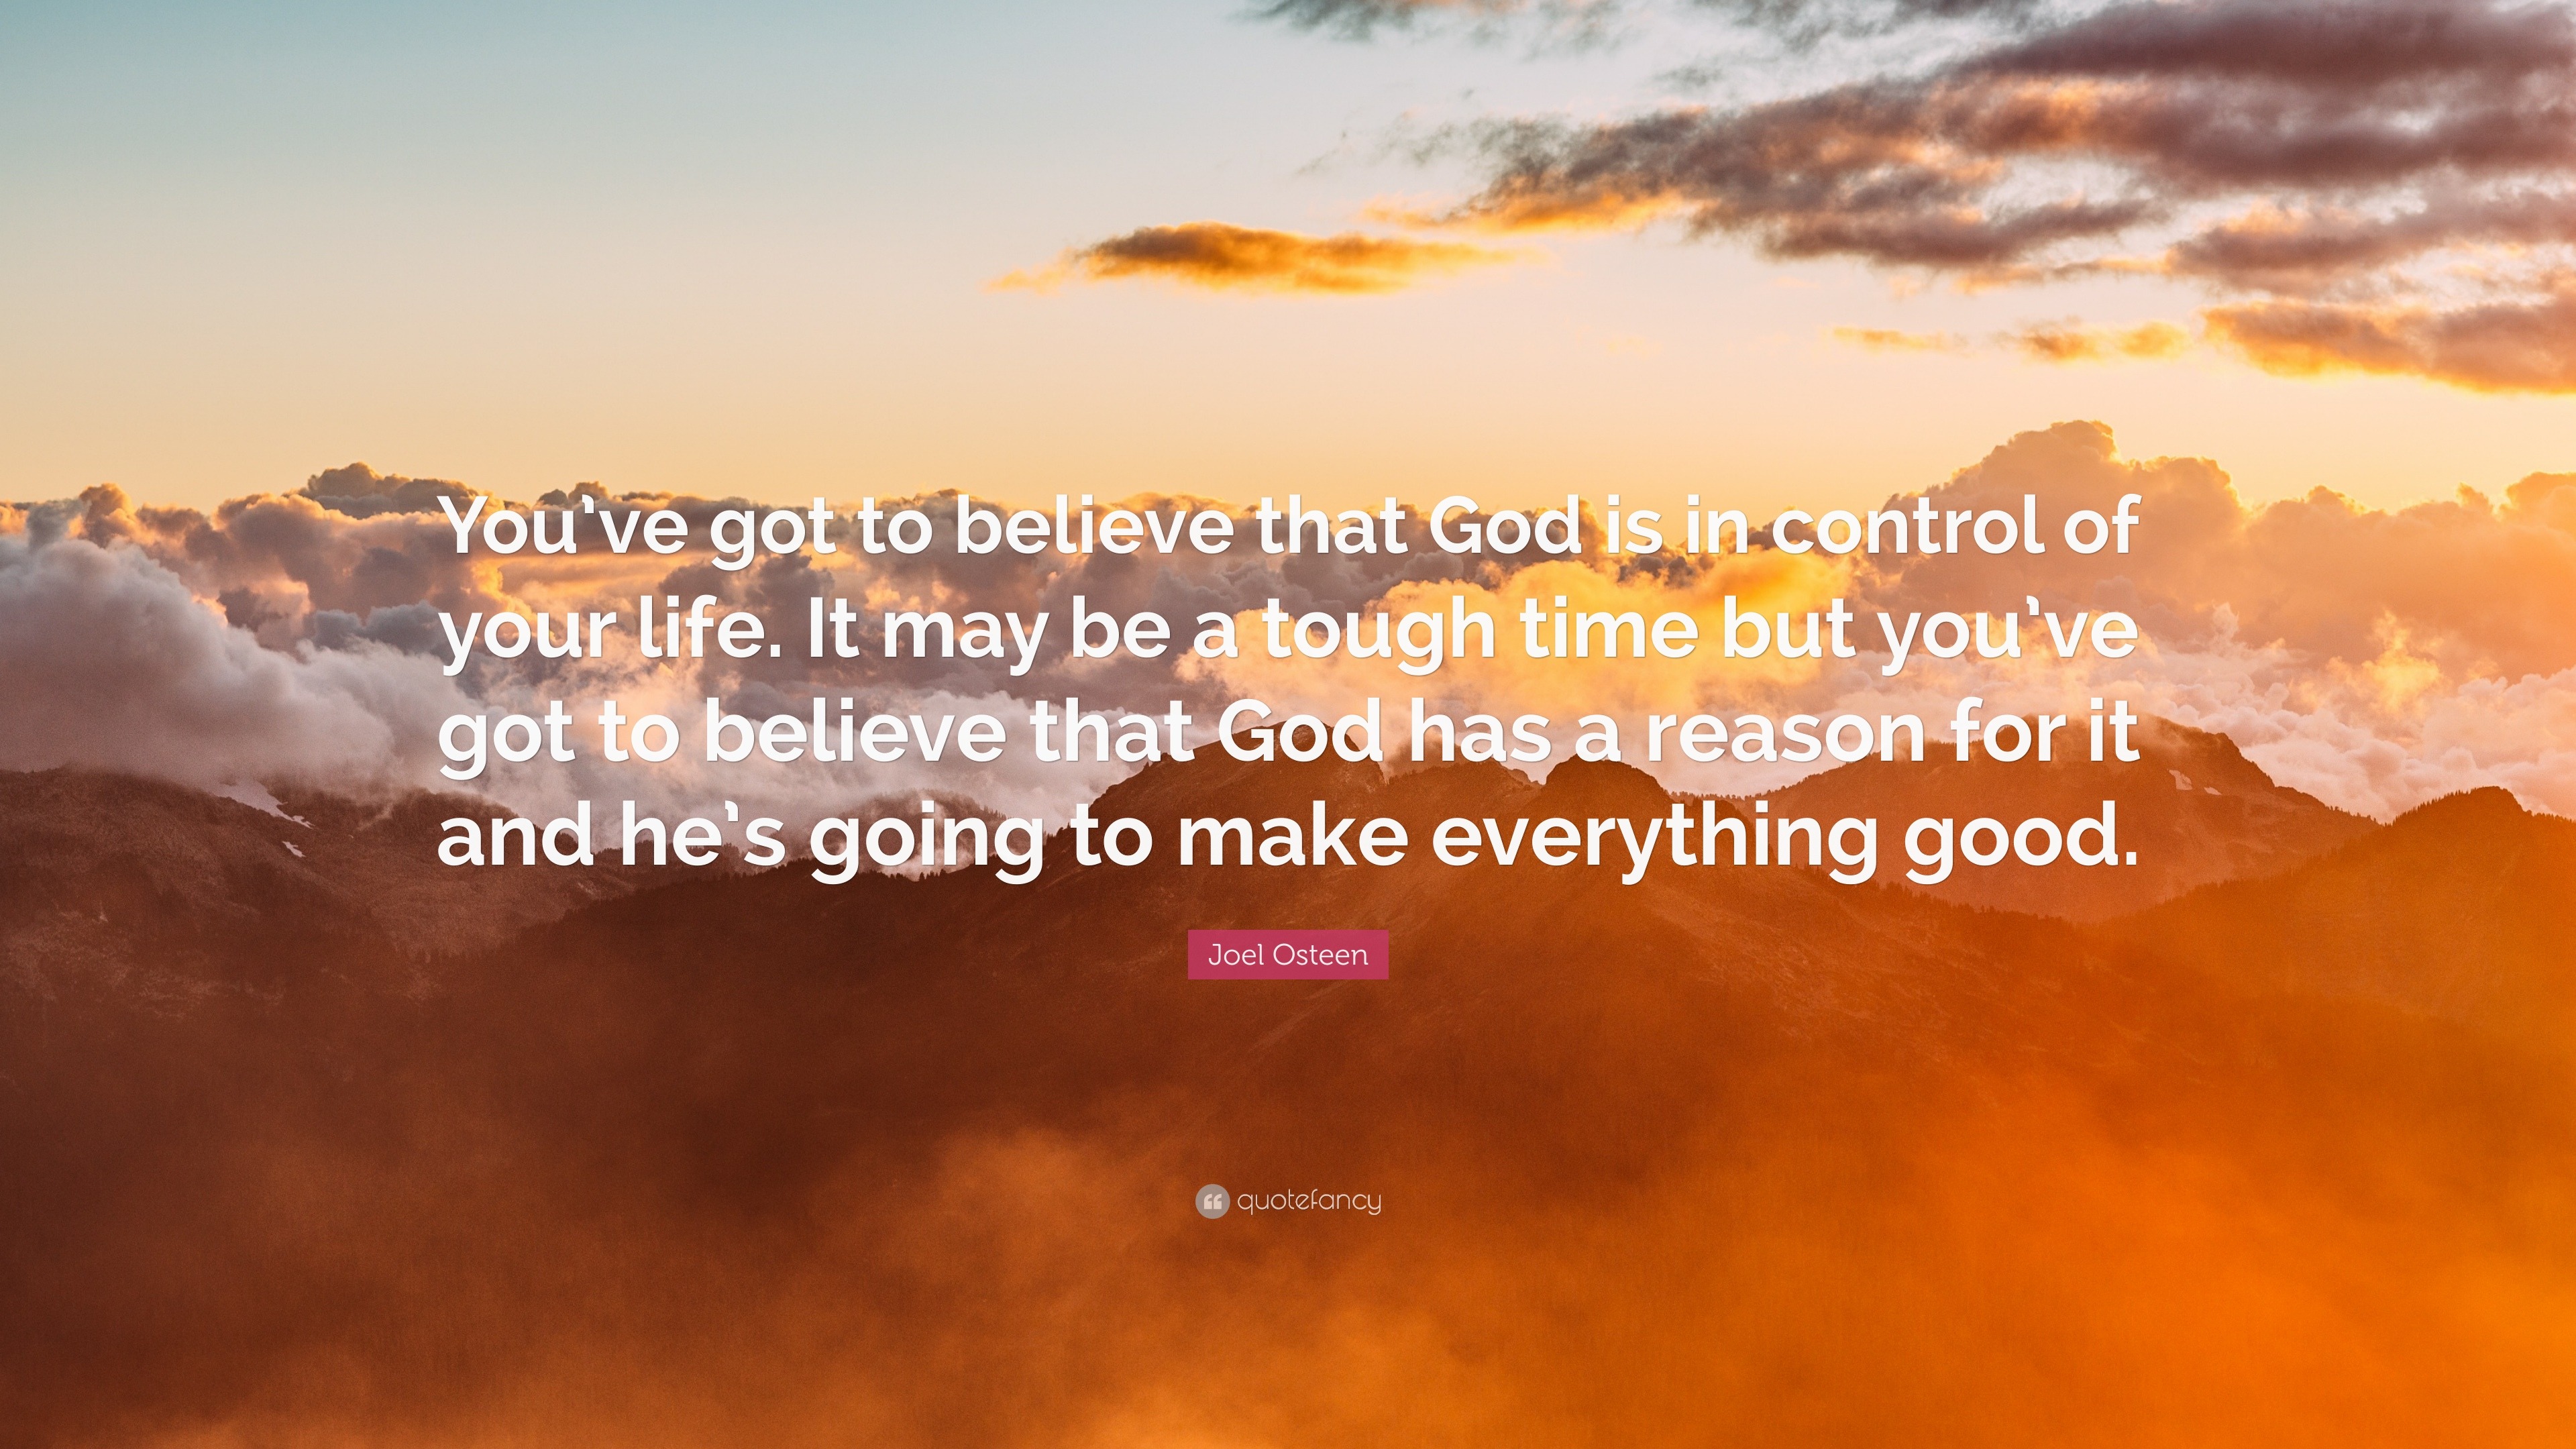 Quotes About Hope “You ve got to believe that God is in control